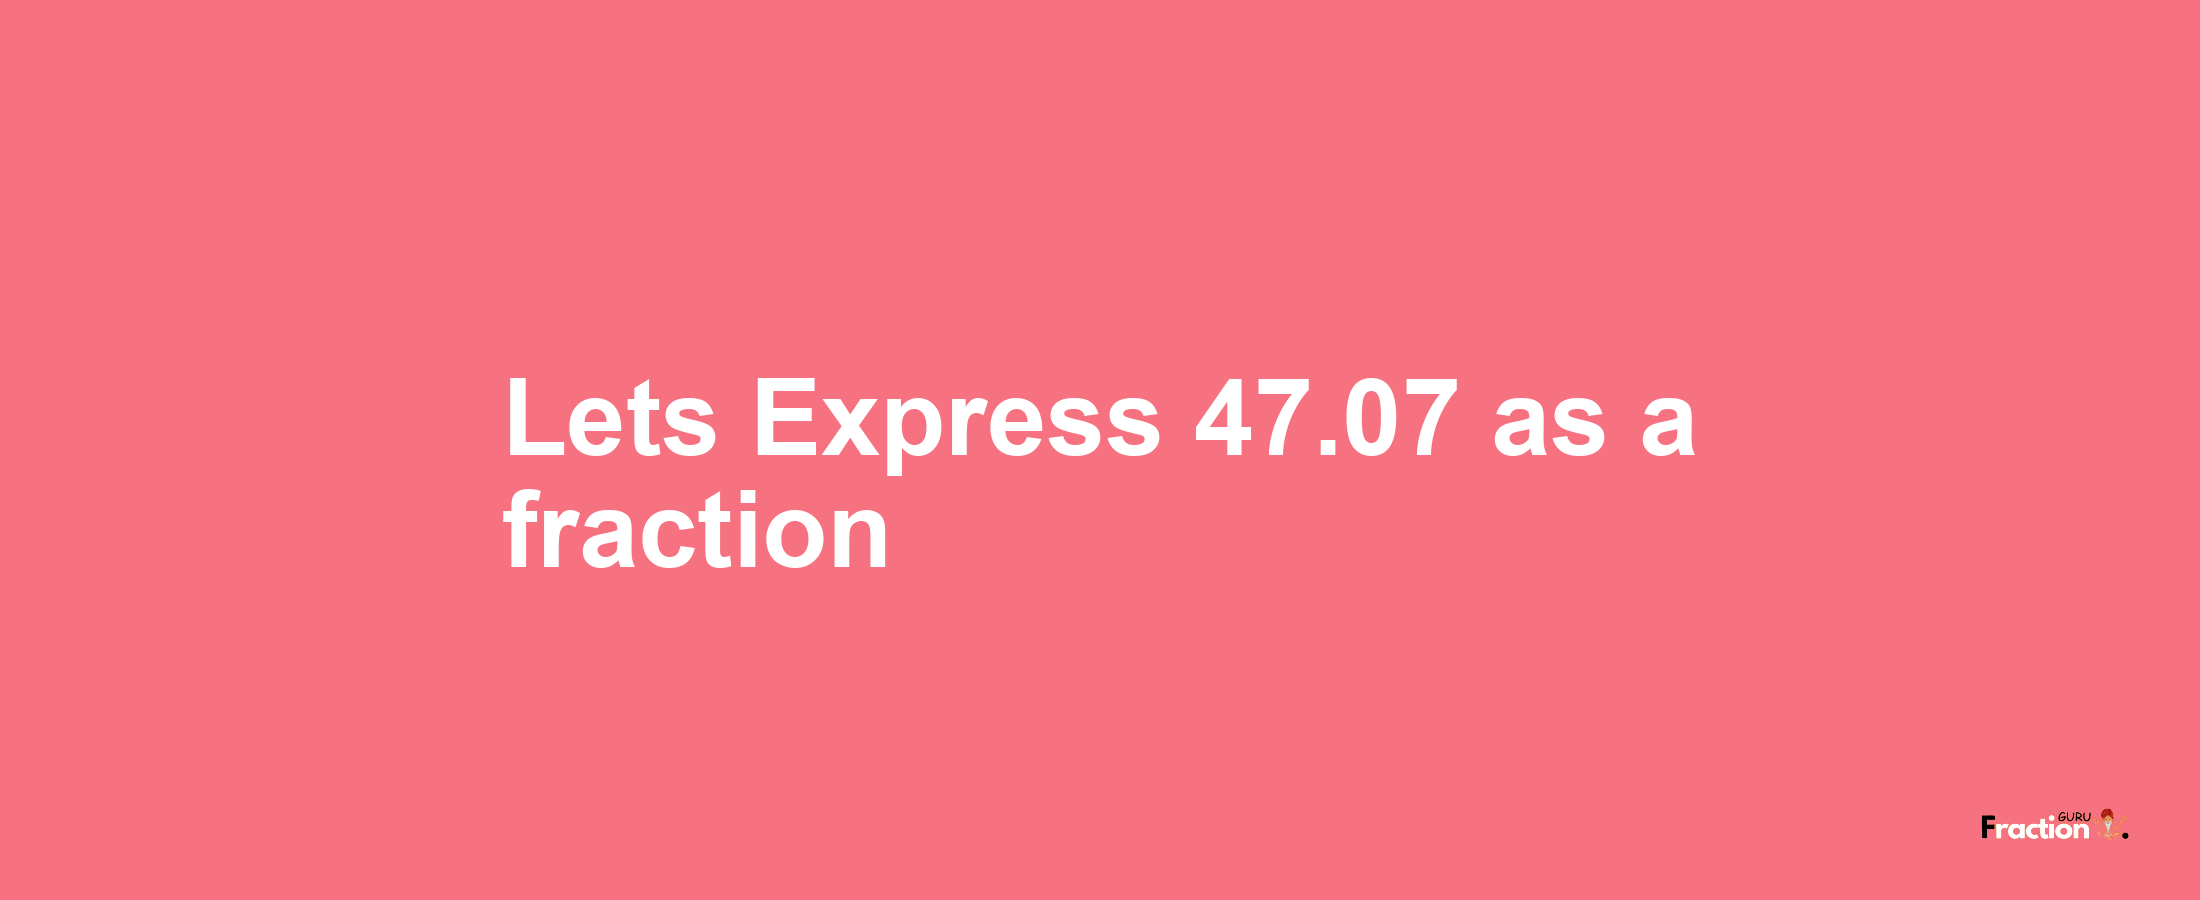 Lets Express 47.07 as afraction